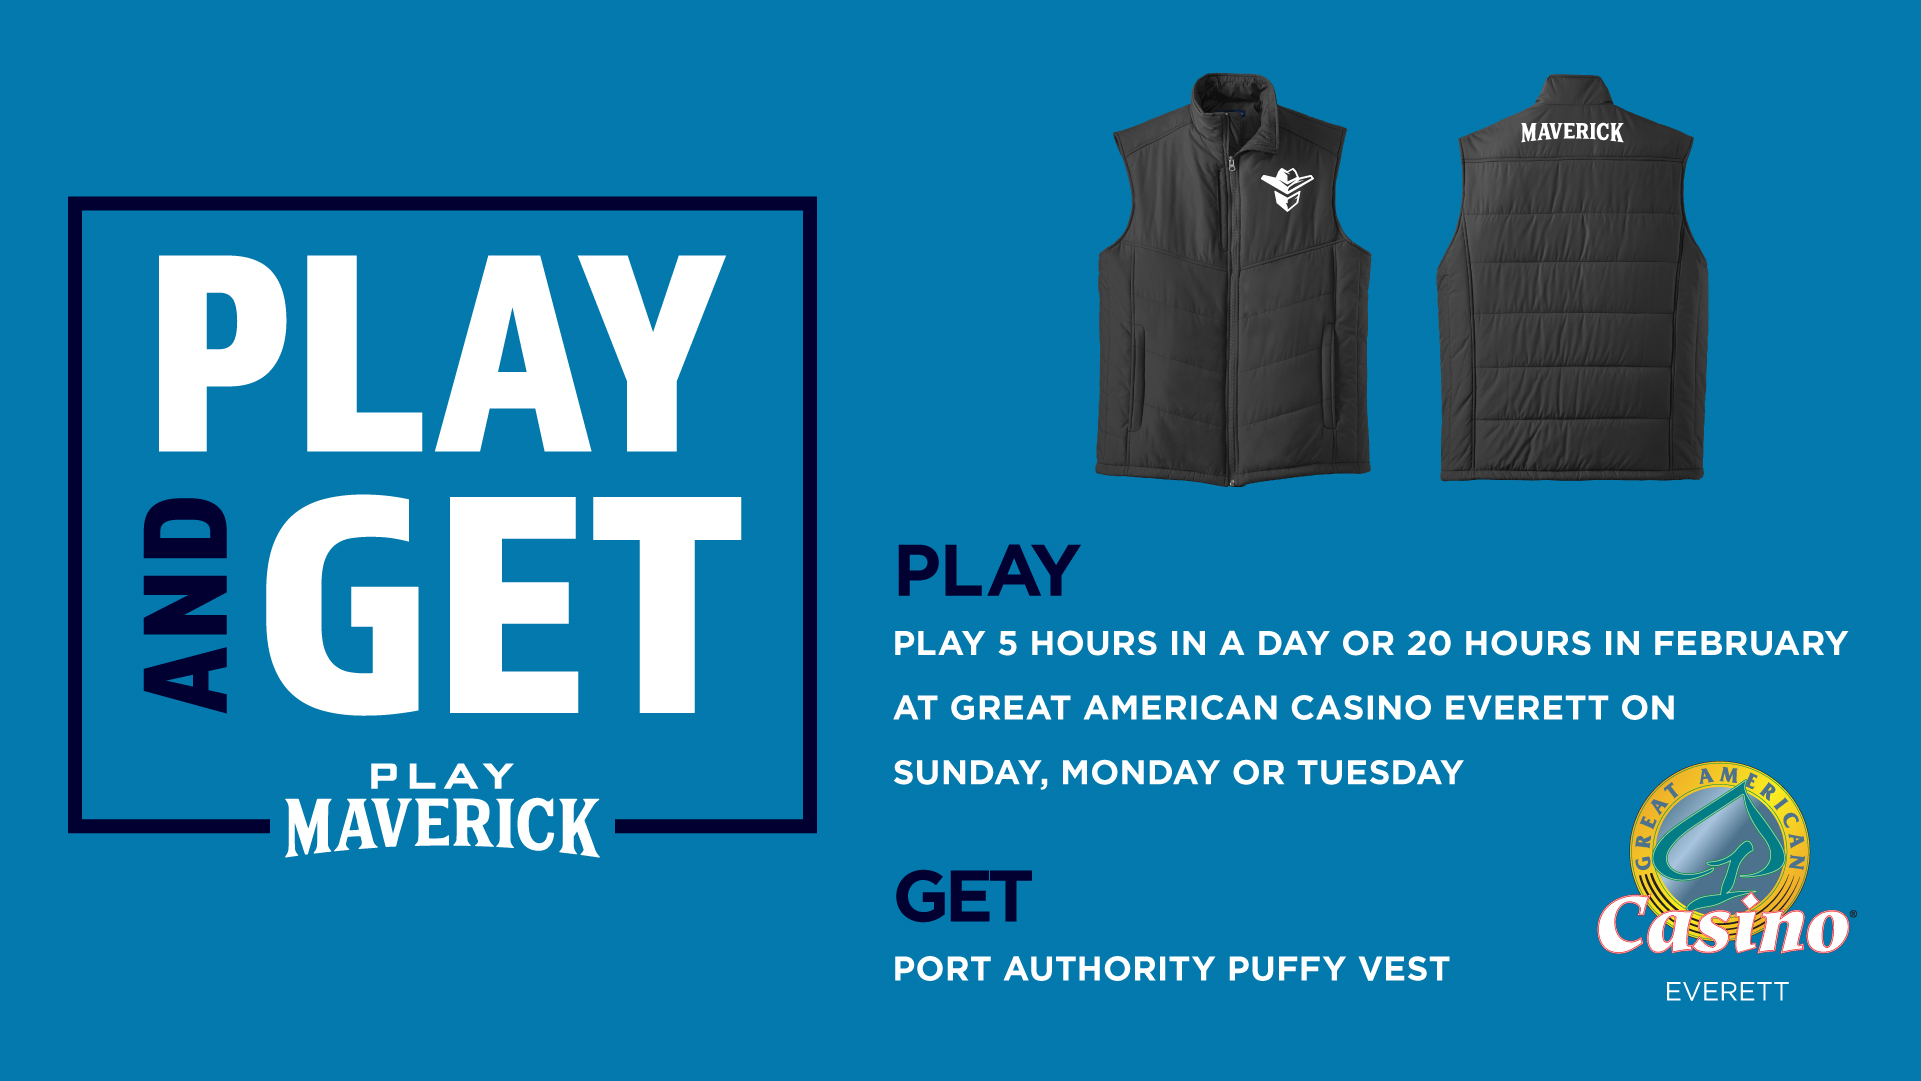 Play and Get | Great American Casino Everett